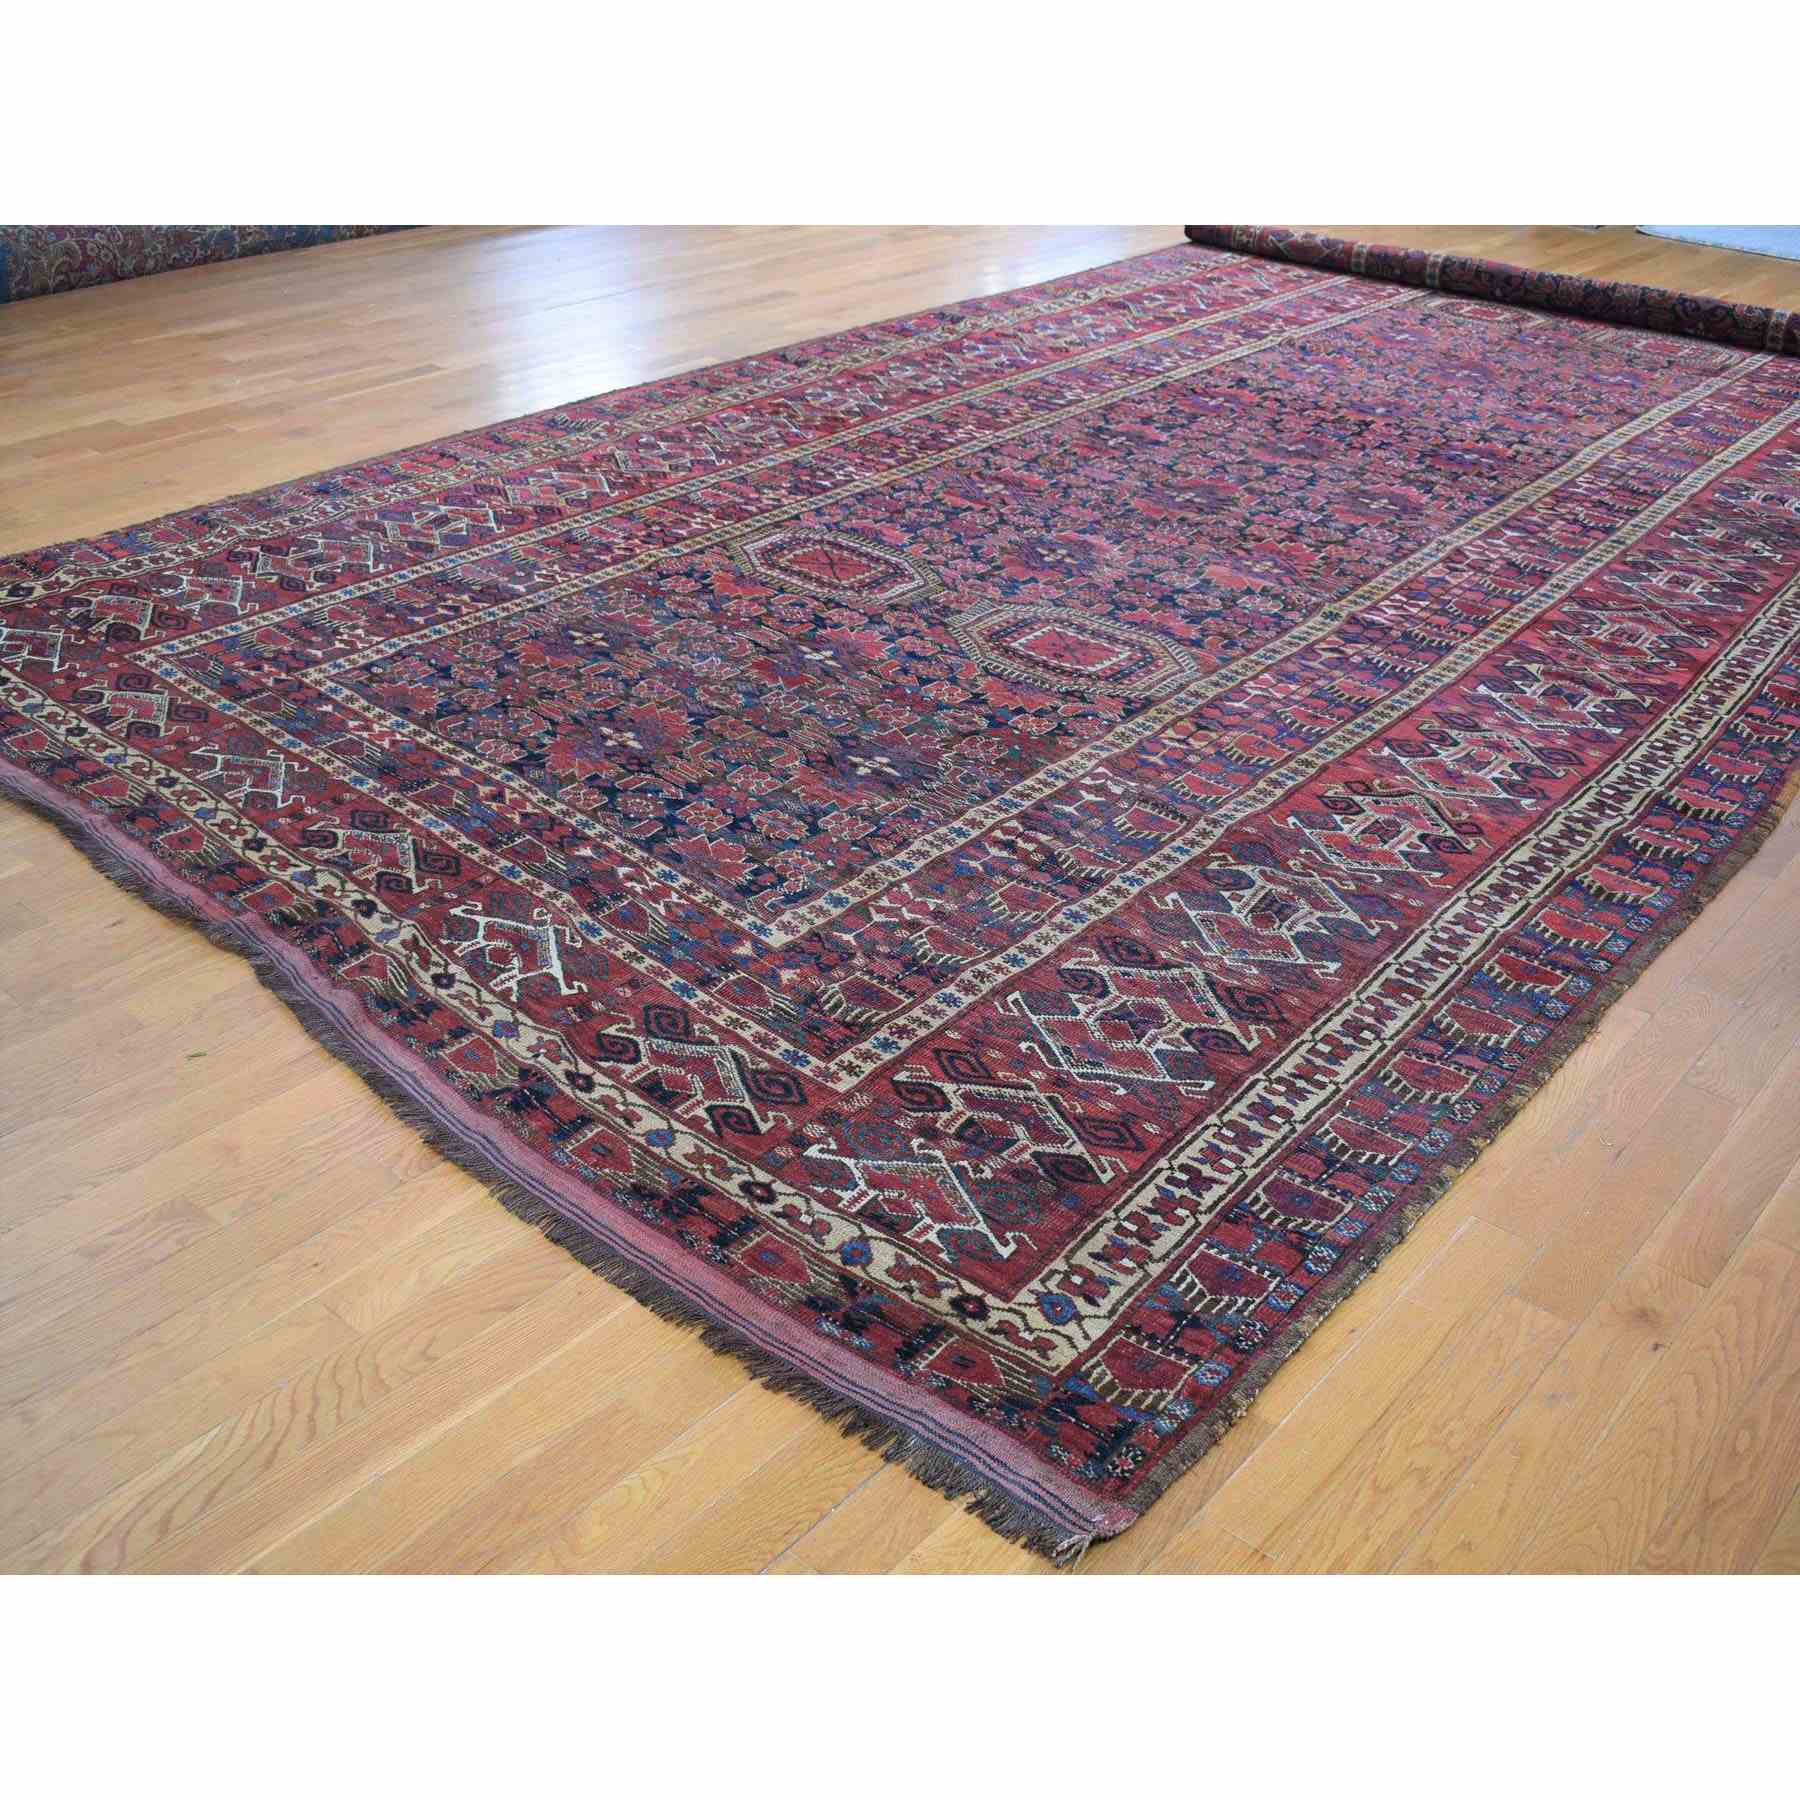 Antique-Hand-Knotted-Rug-401550